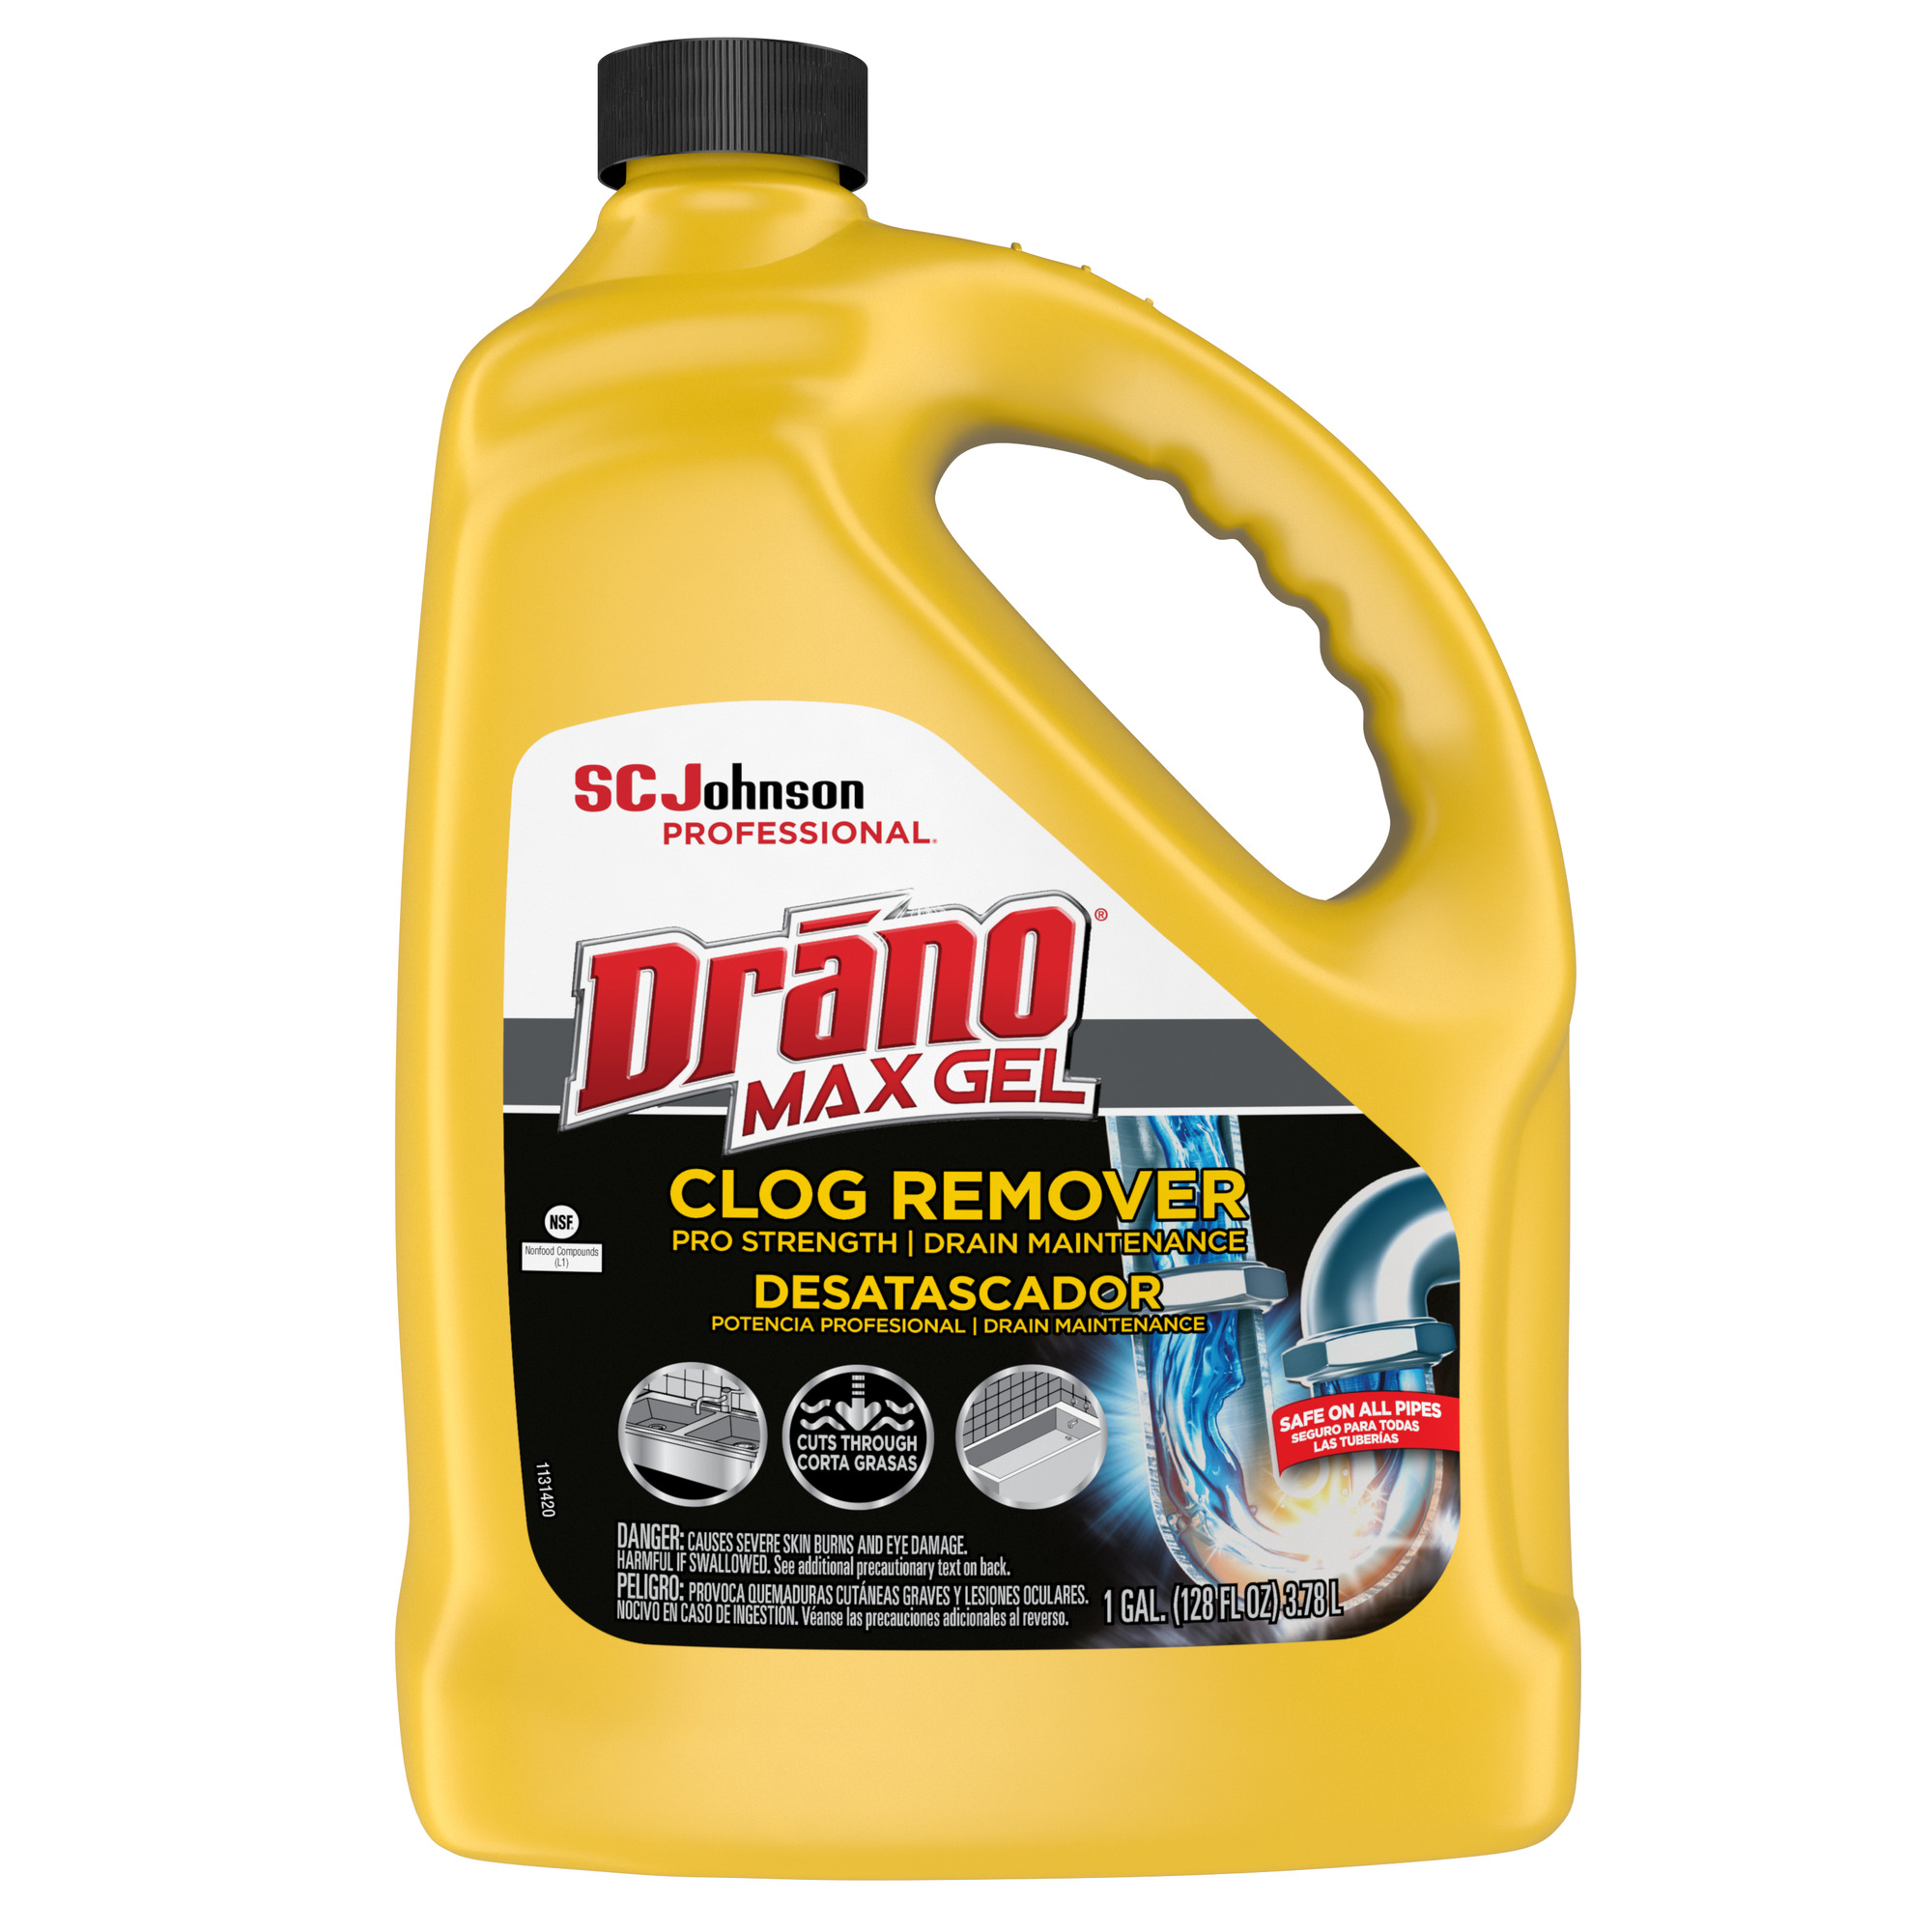 Is Drano Bad For Pipes?, 4 Problems Posed by Drano